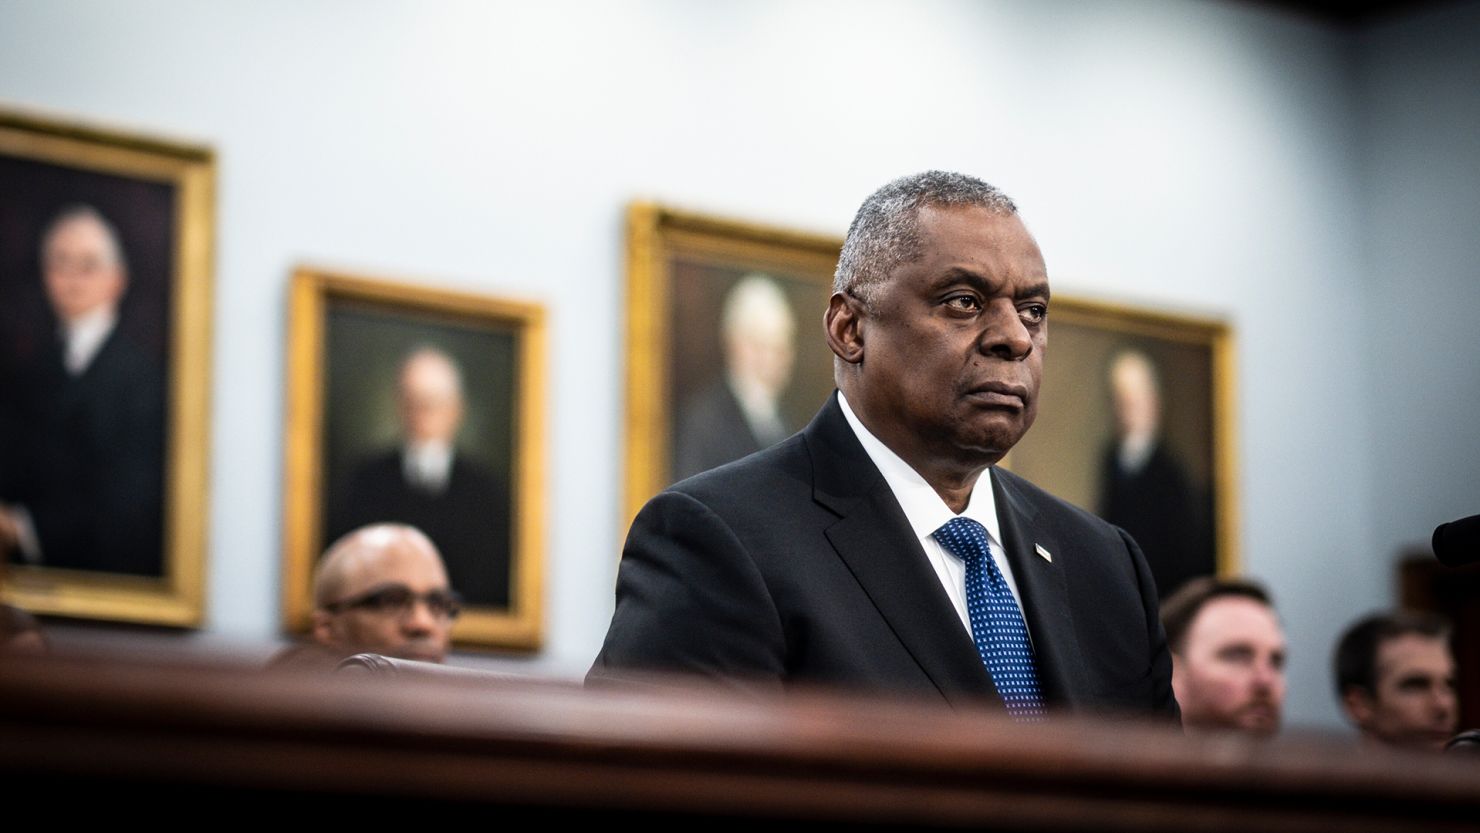 Defense Secretary Lloyd Austin testifies during a House subcommittee hearing on defense appropriations on Capitol Hill in Washington, March 23, 2023.